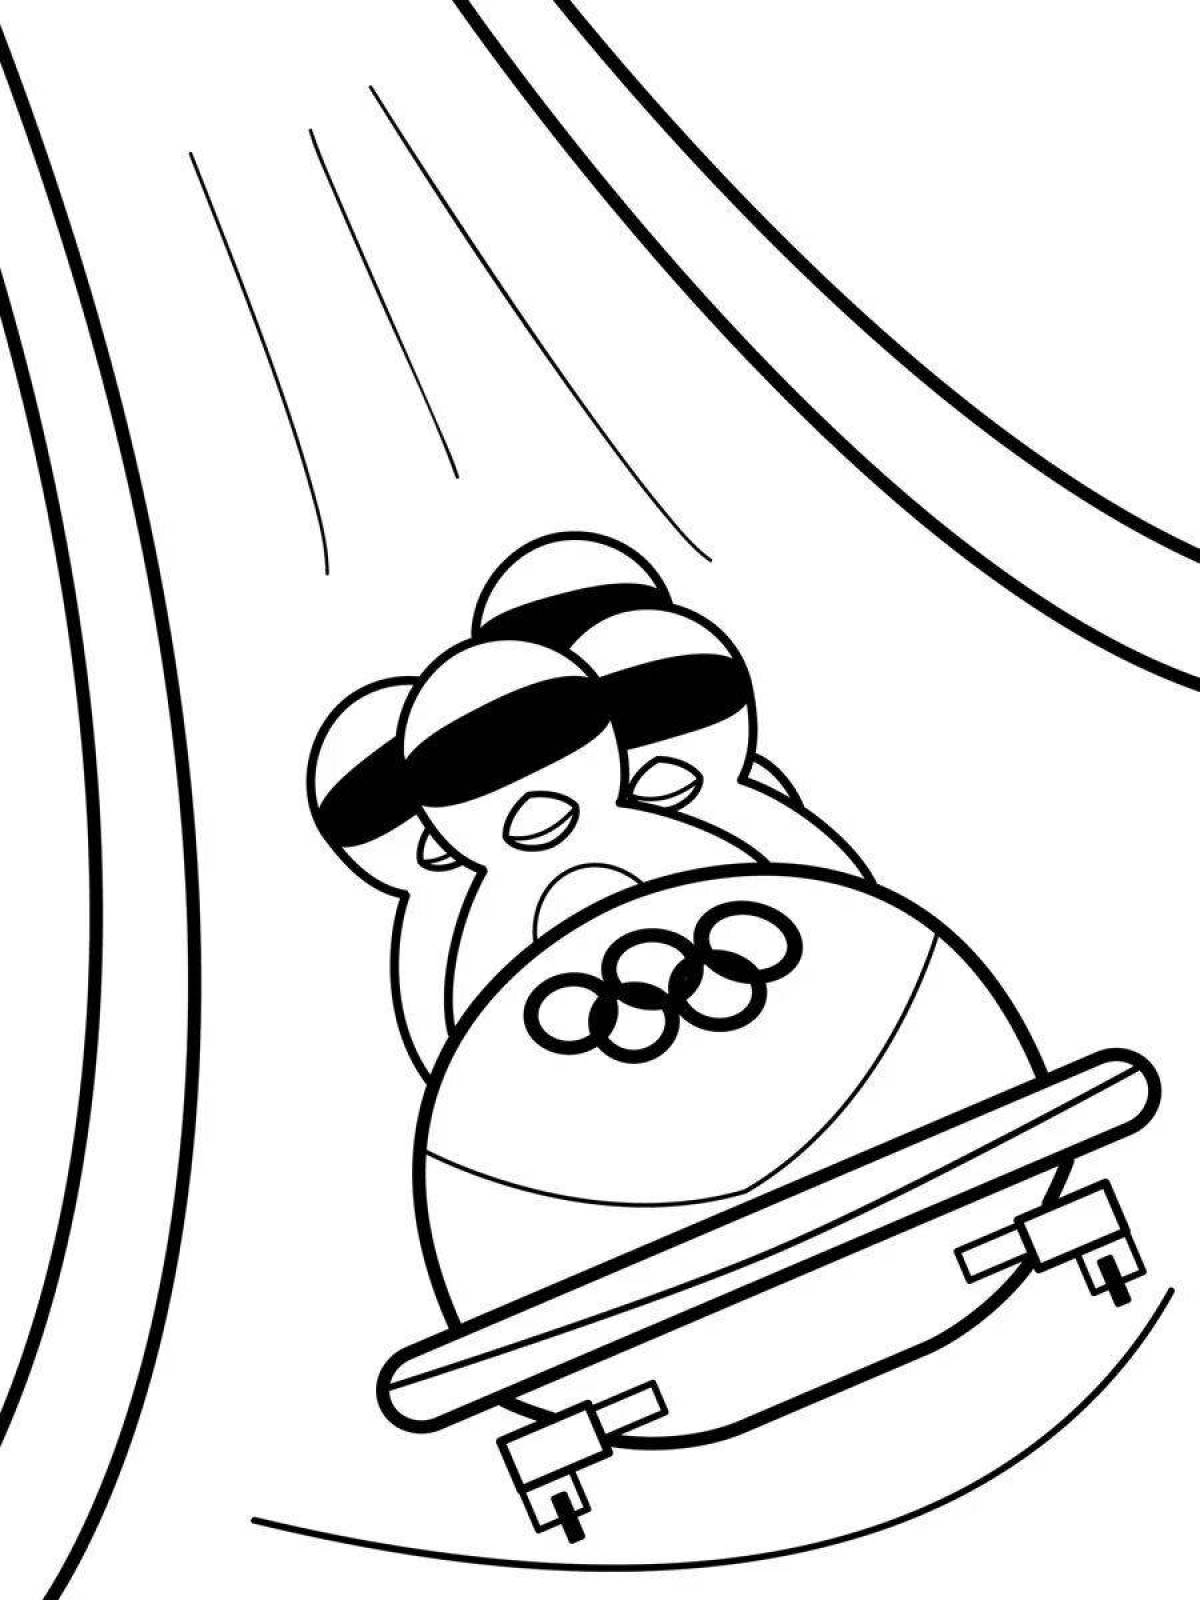 Fun coloring book for luge